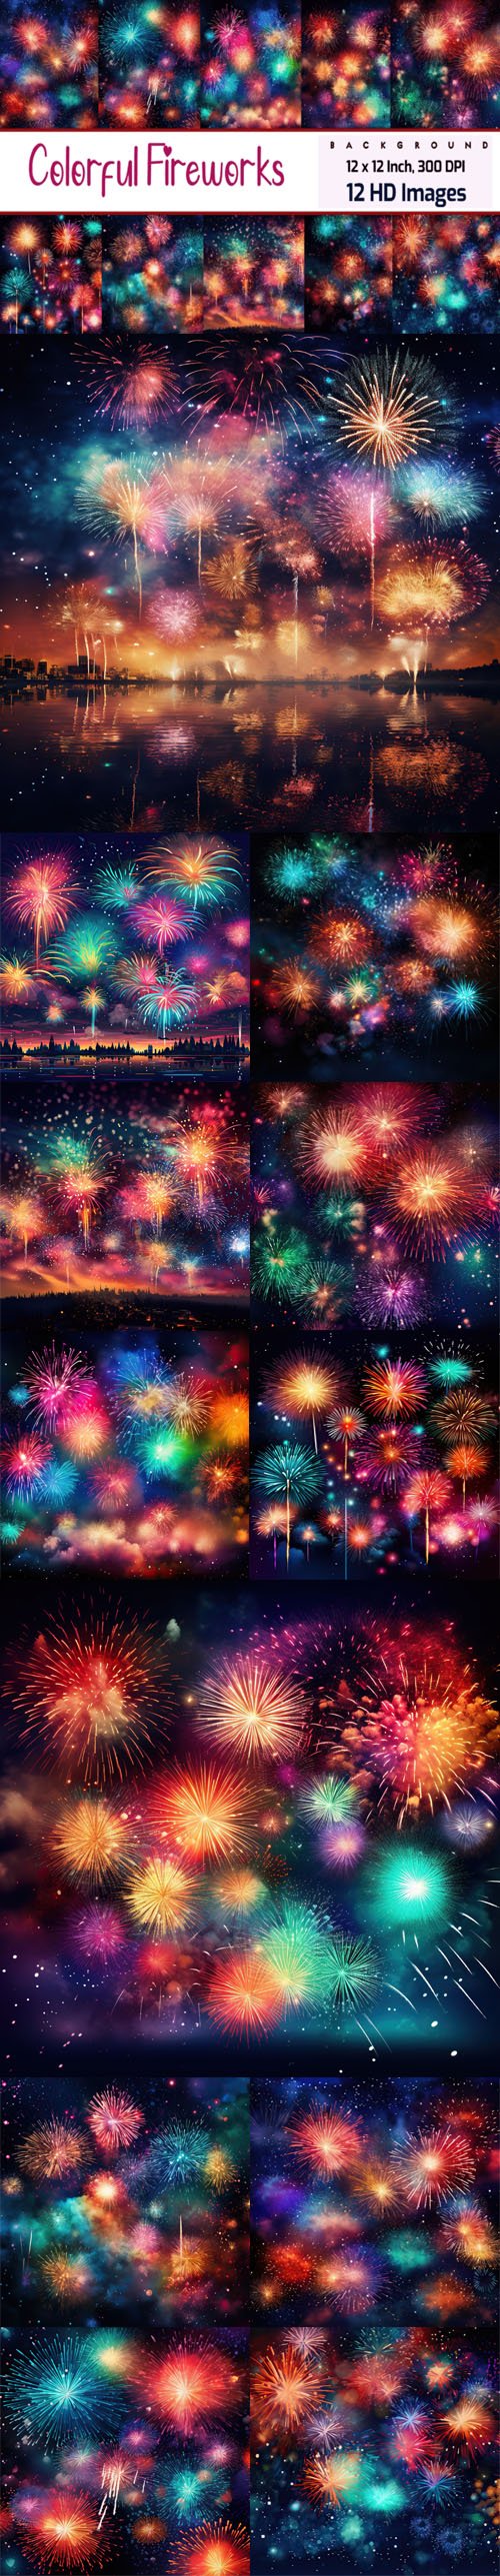 Colorful Fireworks - 12 HD Images Collection